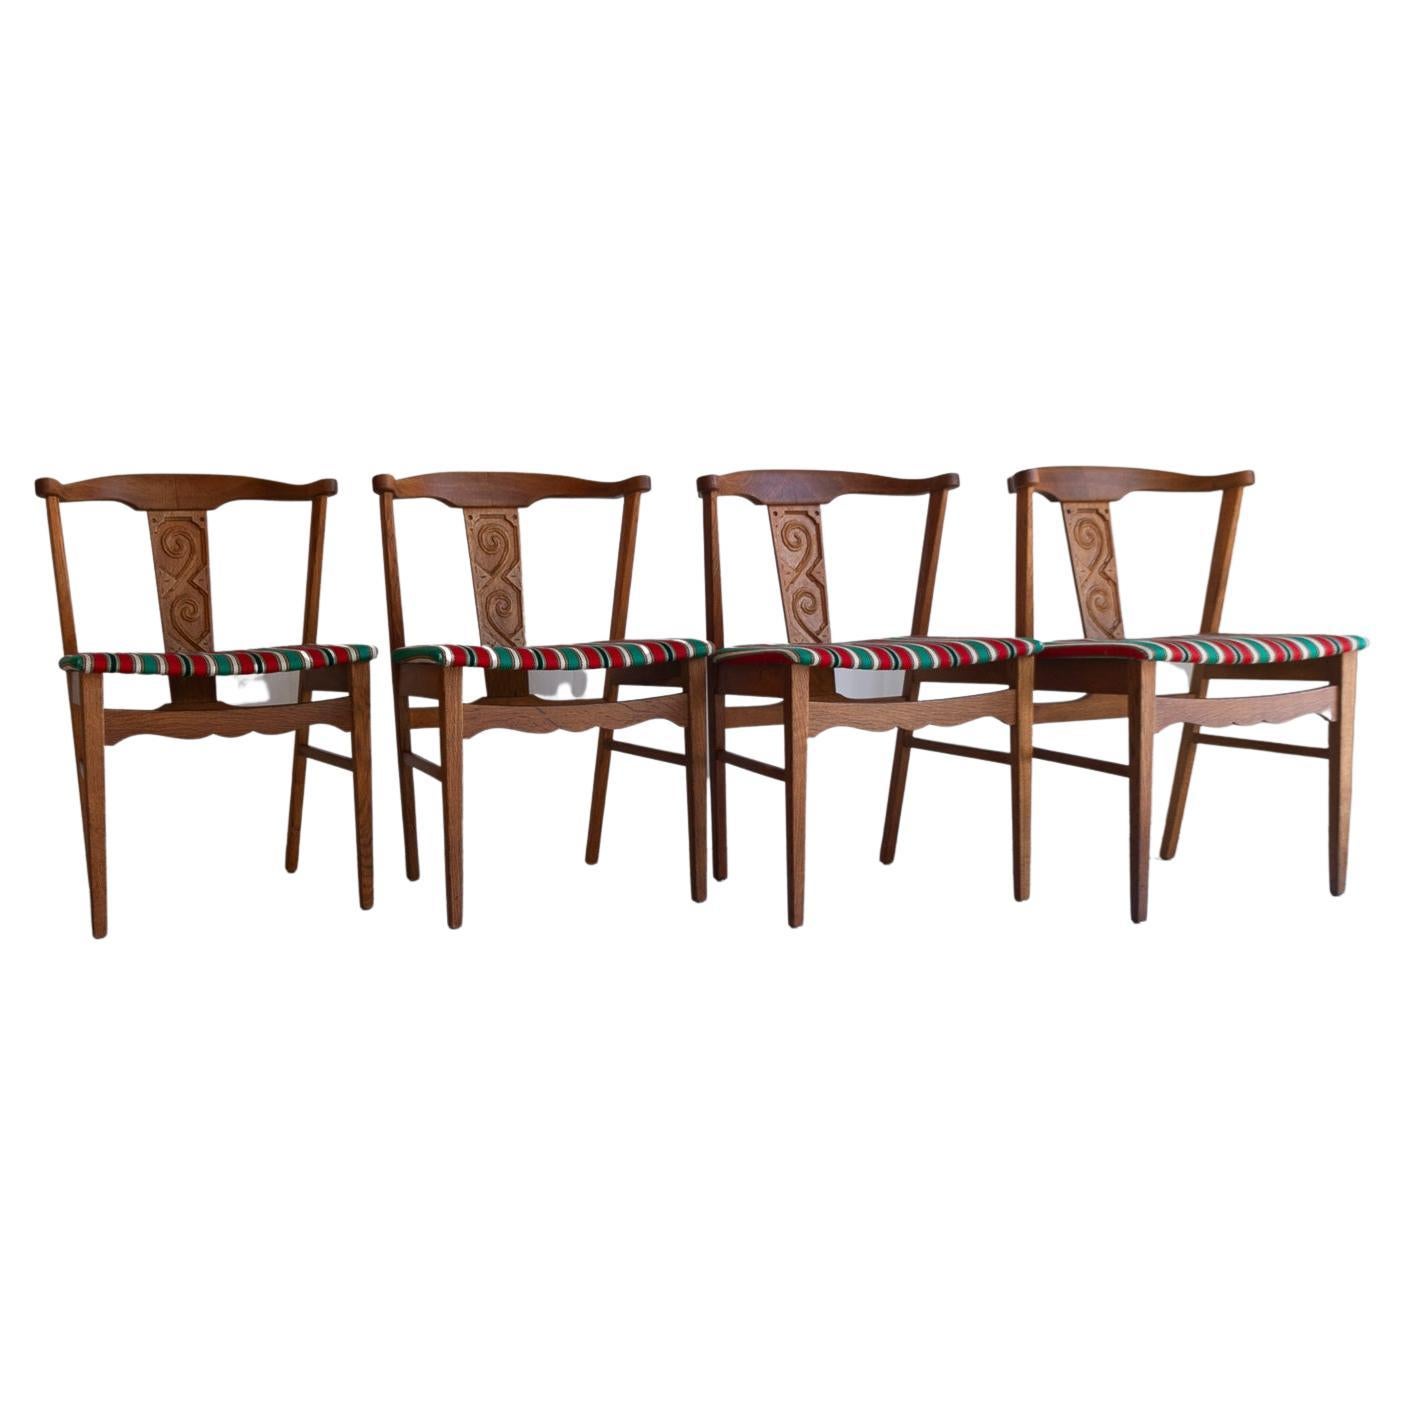 Vintage Danish Oak Dining Chairs by Kjærnulf, 1960s. Set of 4. For Sale